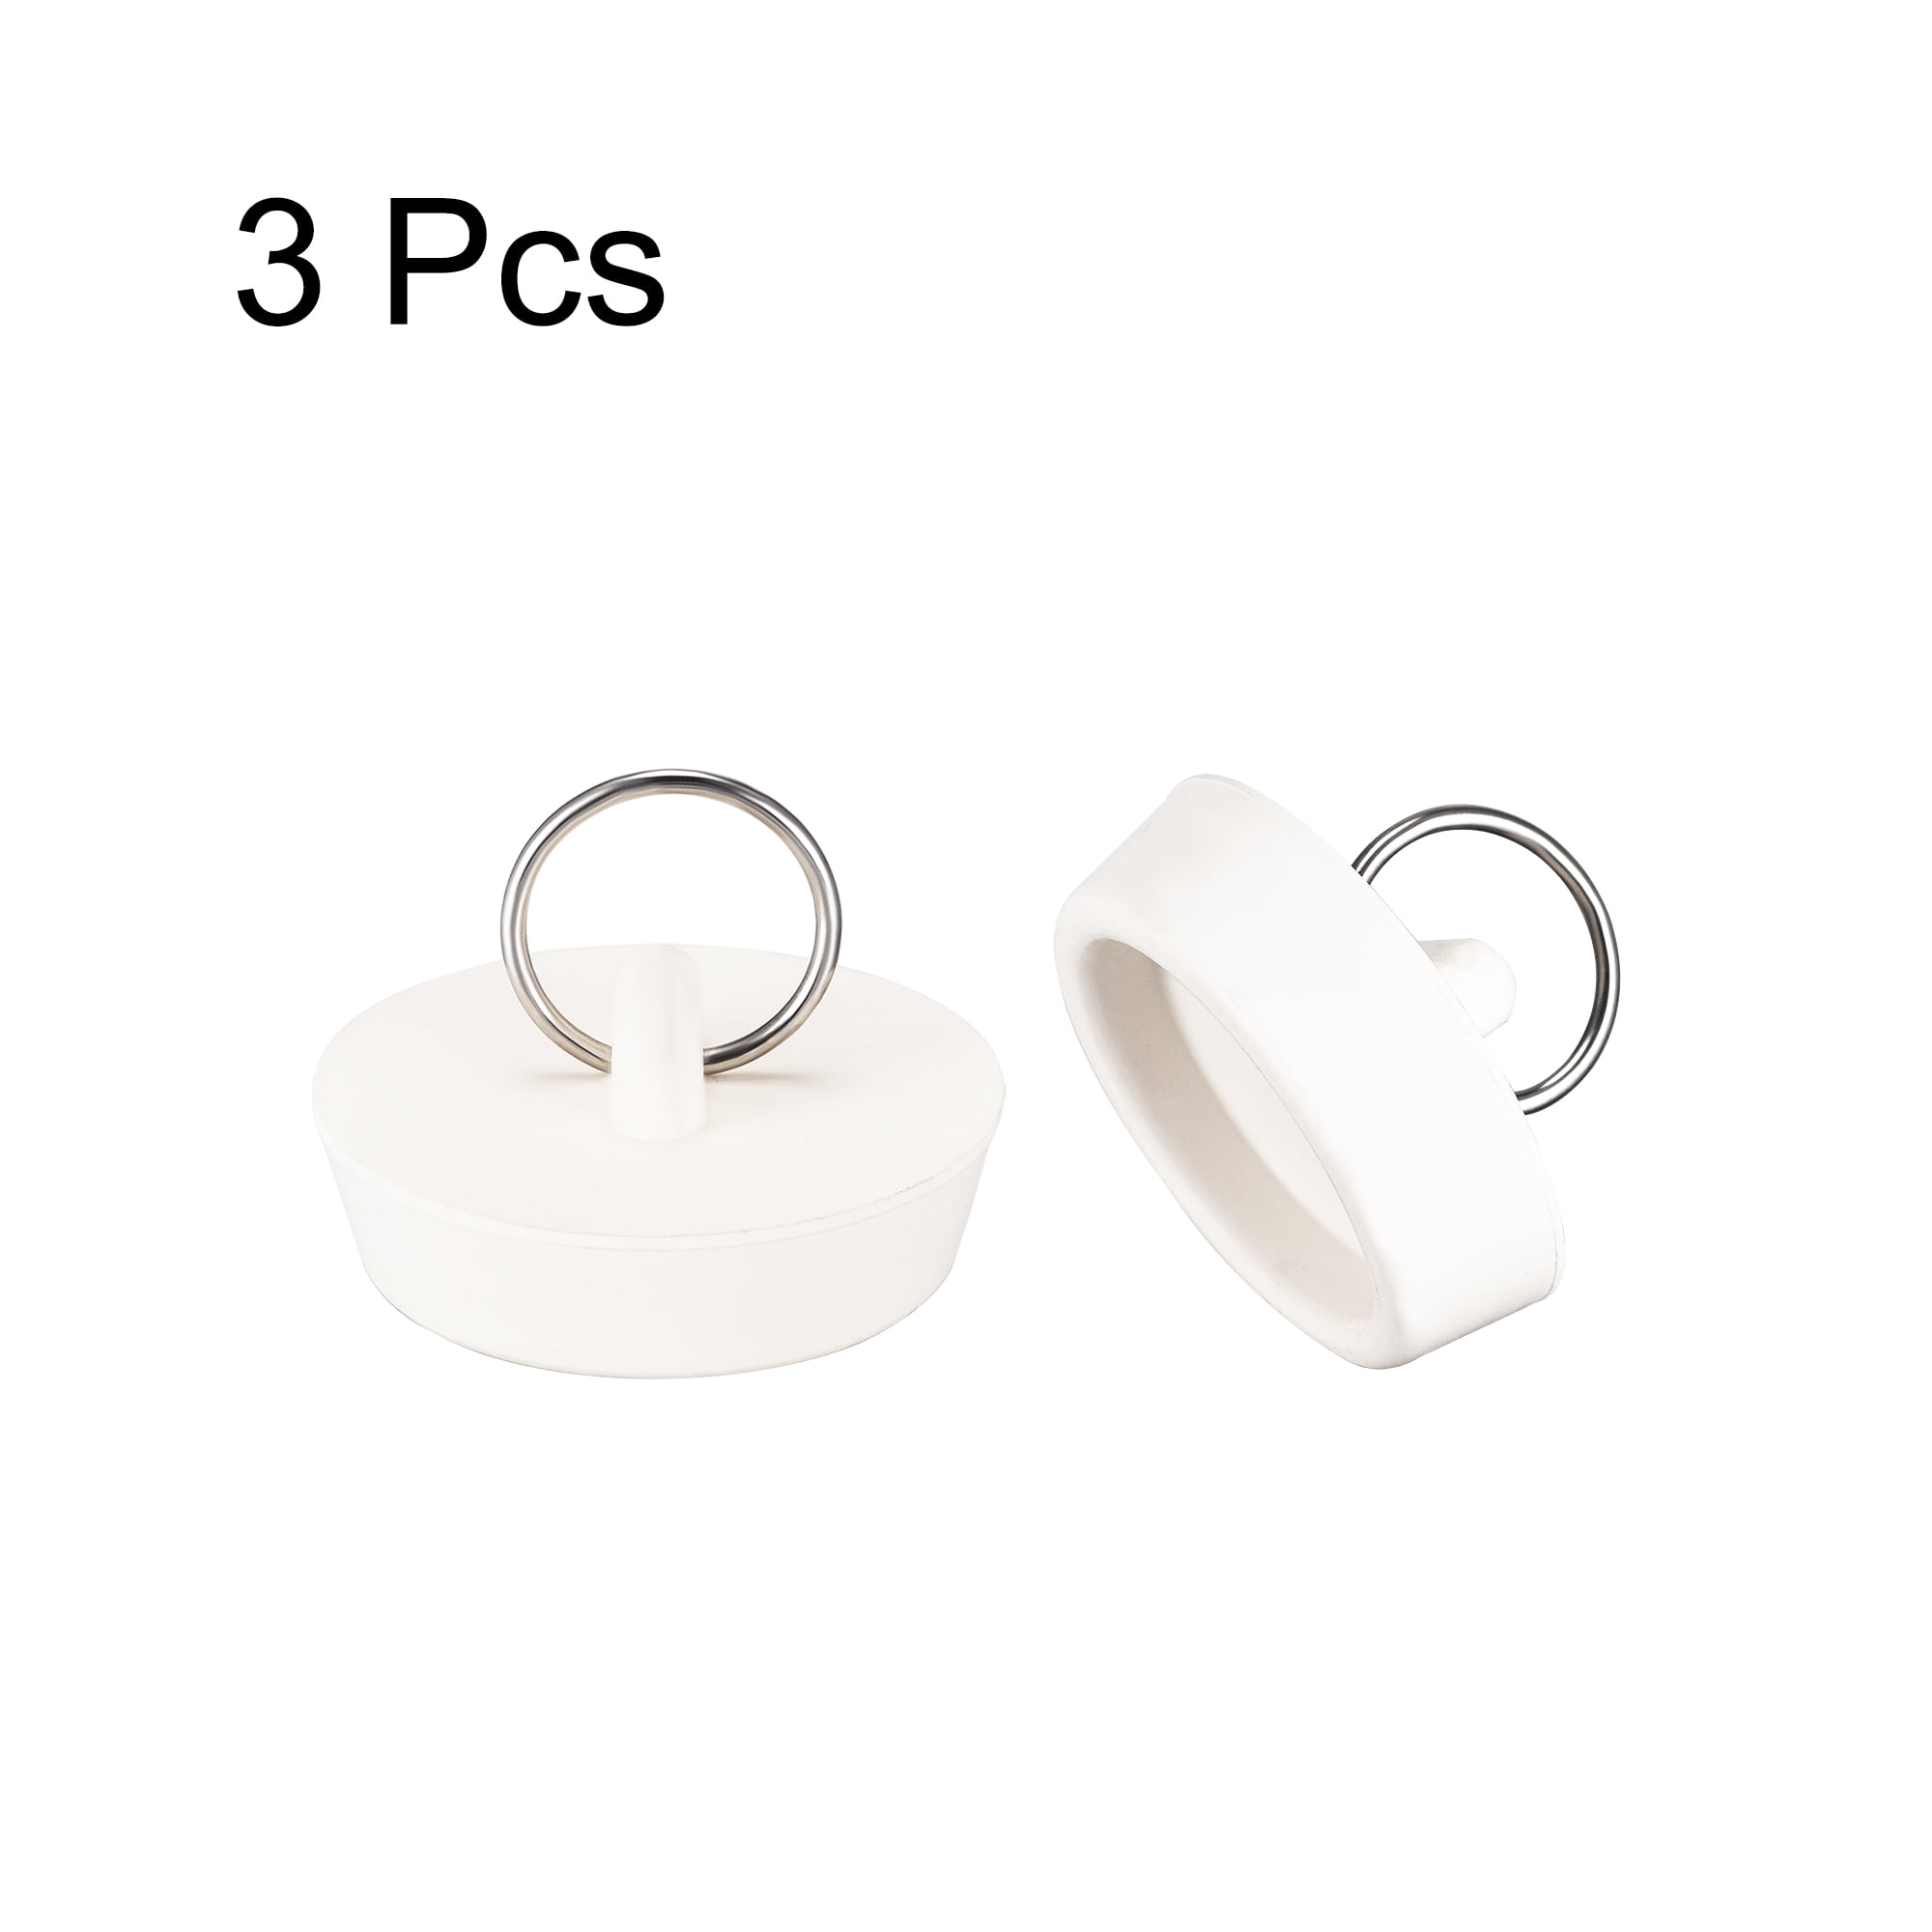 ZYAMY 4pcs White Drain Stopper, Rubber Sink Stopper Plug with Hanging Ring Laundry Bathroom Sink Bathtub Drains Washroom Kitchen Supplies 4 Sizes